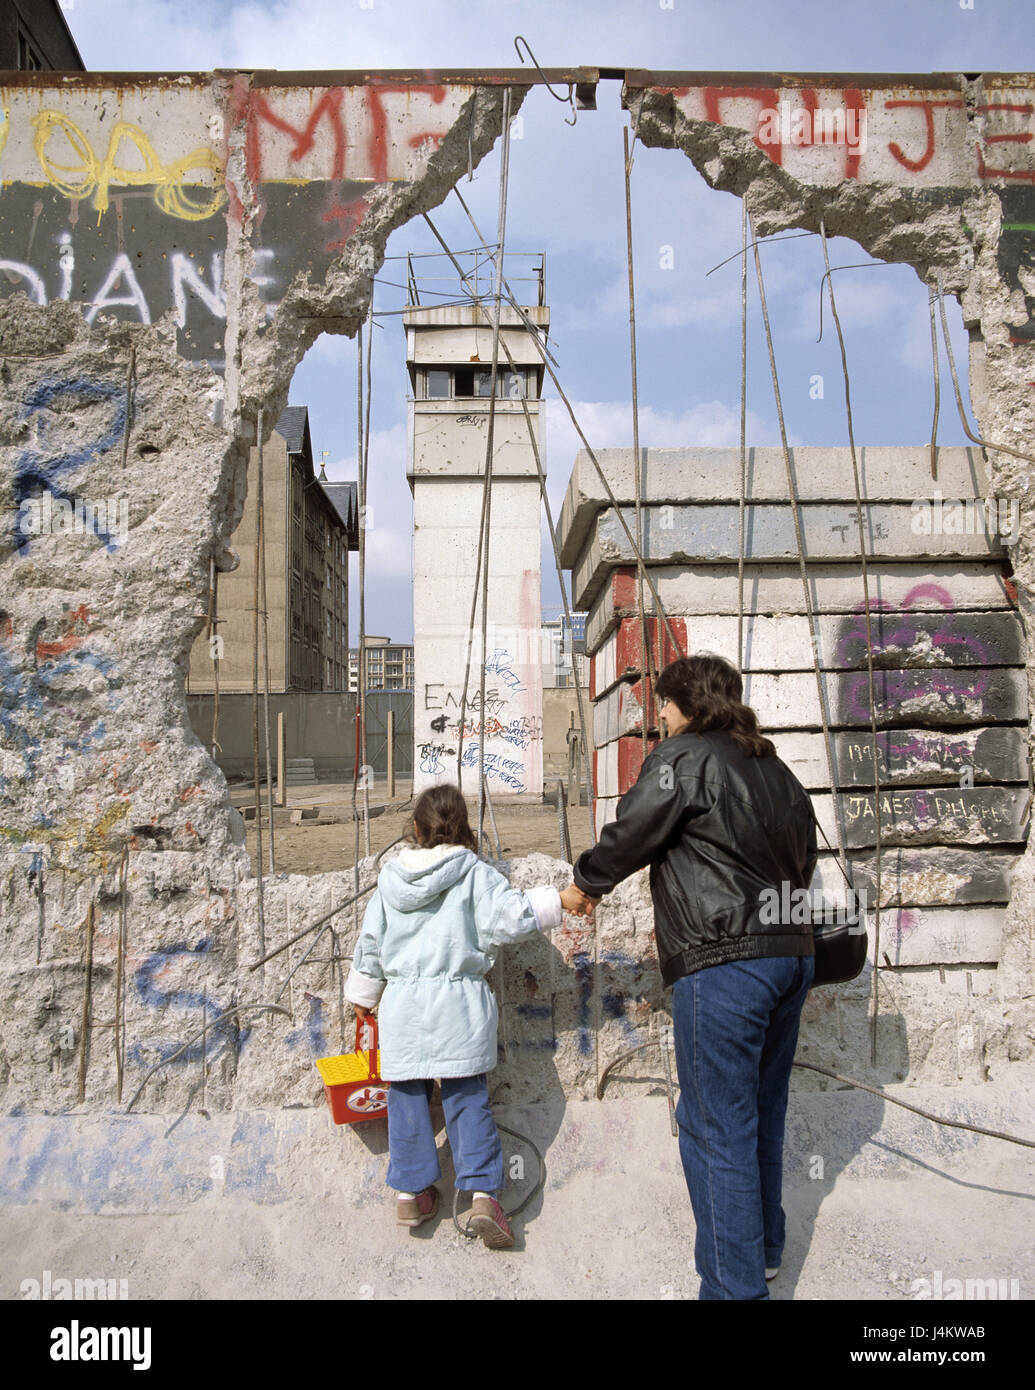 Germany, Berlin, Berlin Wall, Fall of the Wall, in 1989, mother, child, view, East Berlin, watch-tower, no model release, Europe, town, Fall of the Wall, border orifice, borderline case, opening of the Berlin Wall, reunion, event, historically, story, the GDR, margin, defensive wall, politics, woman, Stock Photo